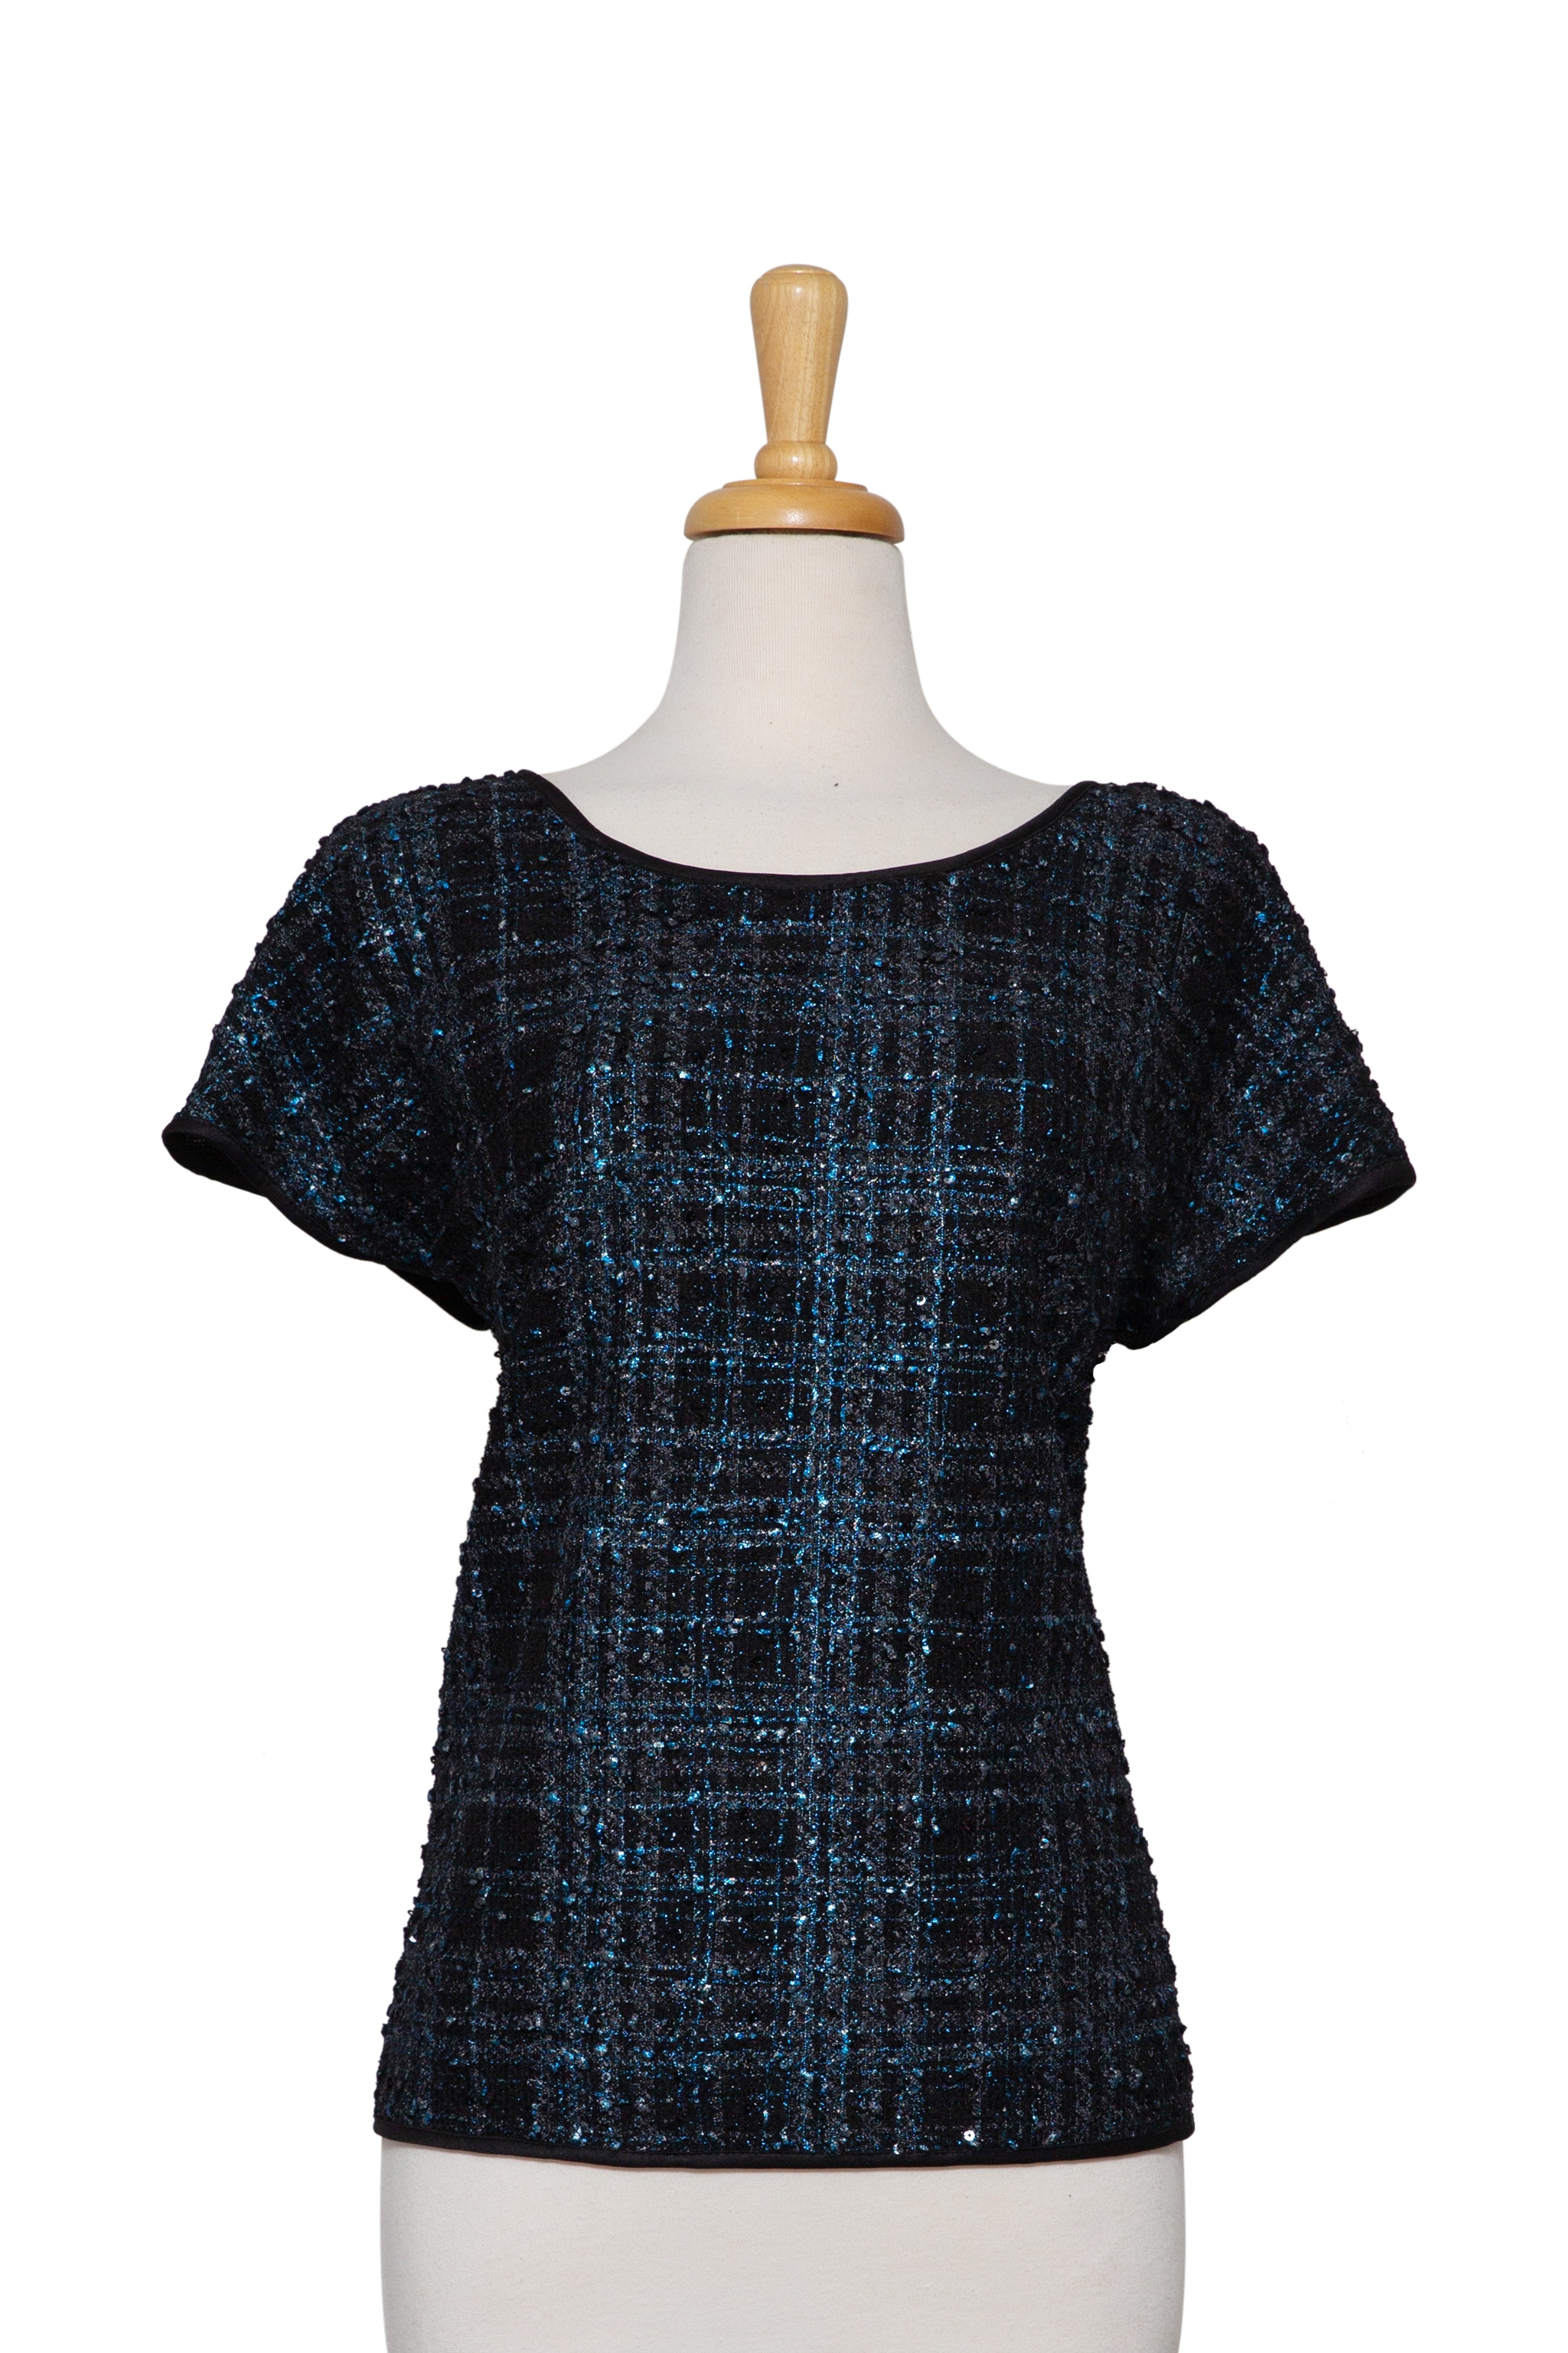 Plus Size Blue and Black Metallic Knit, Solid Black Ponte Knit Back, Short Sleeve Top